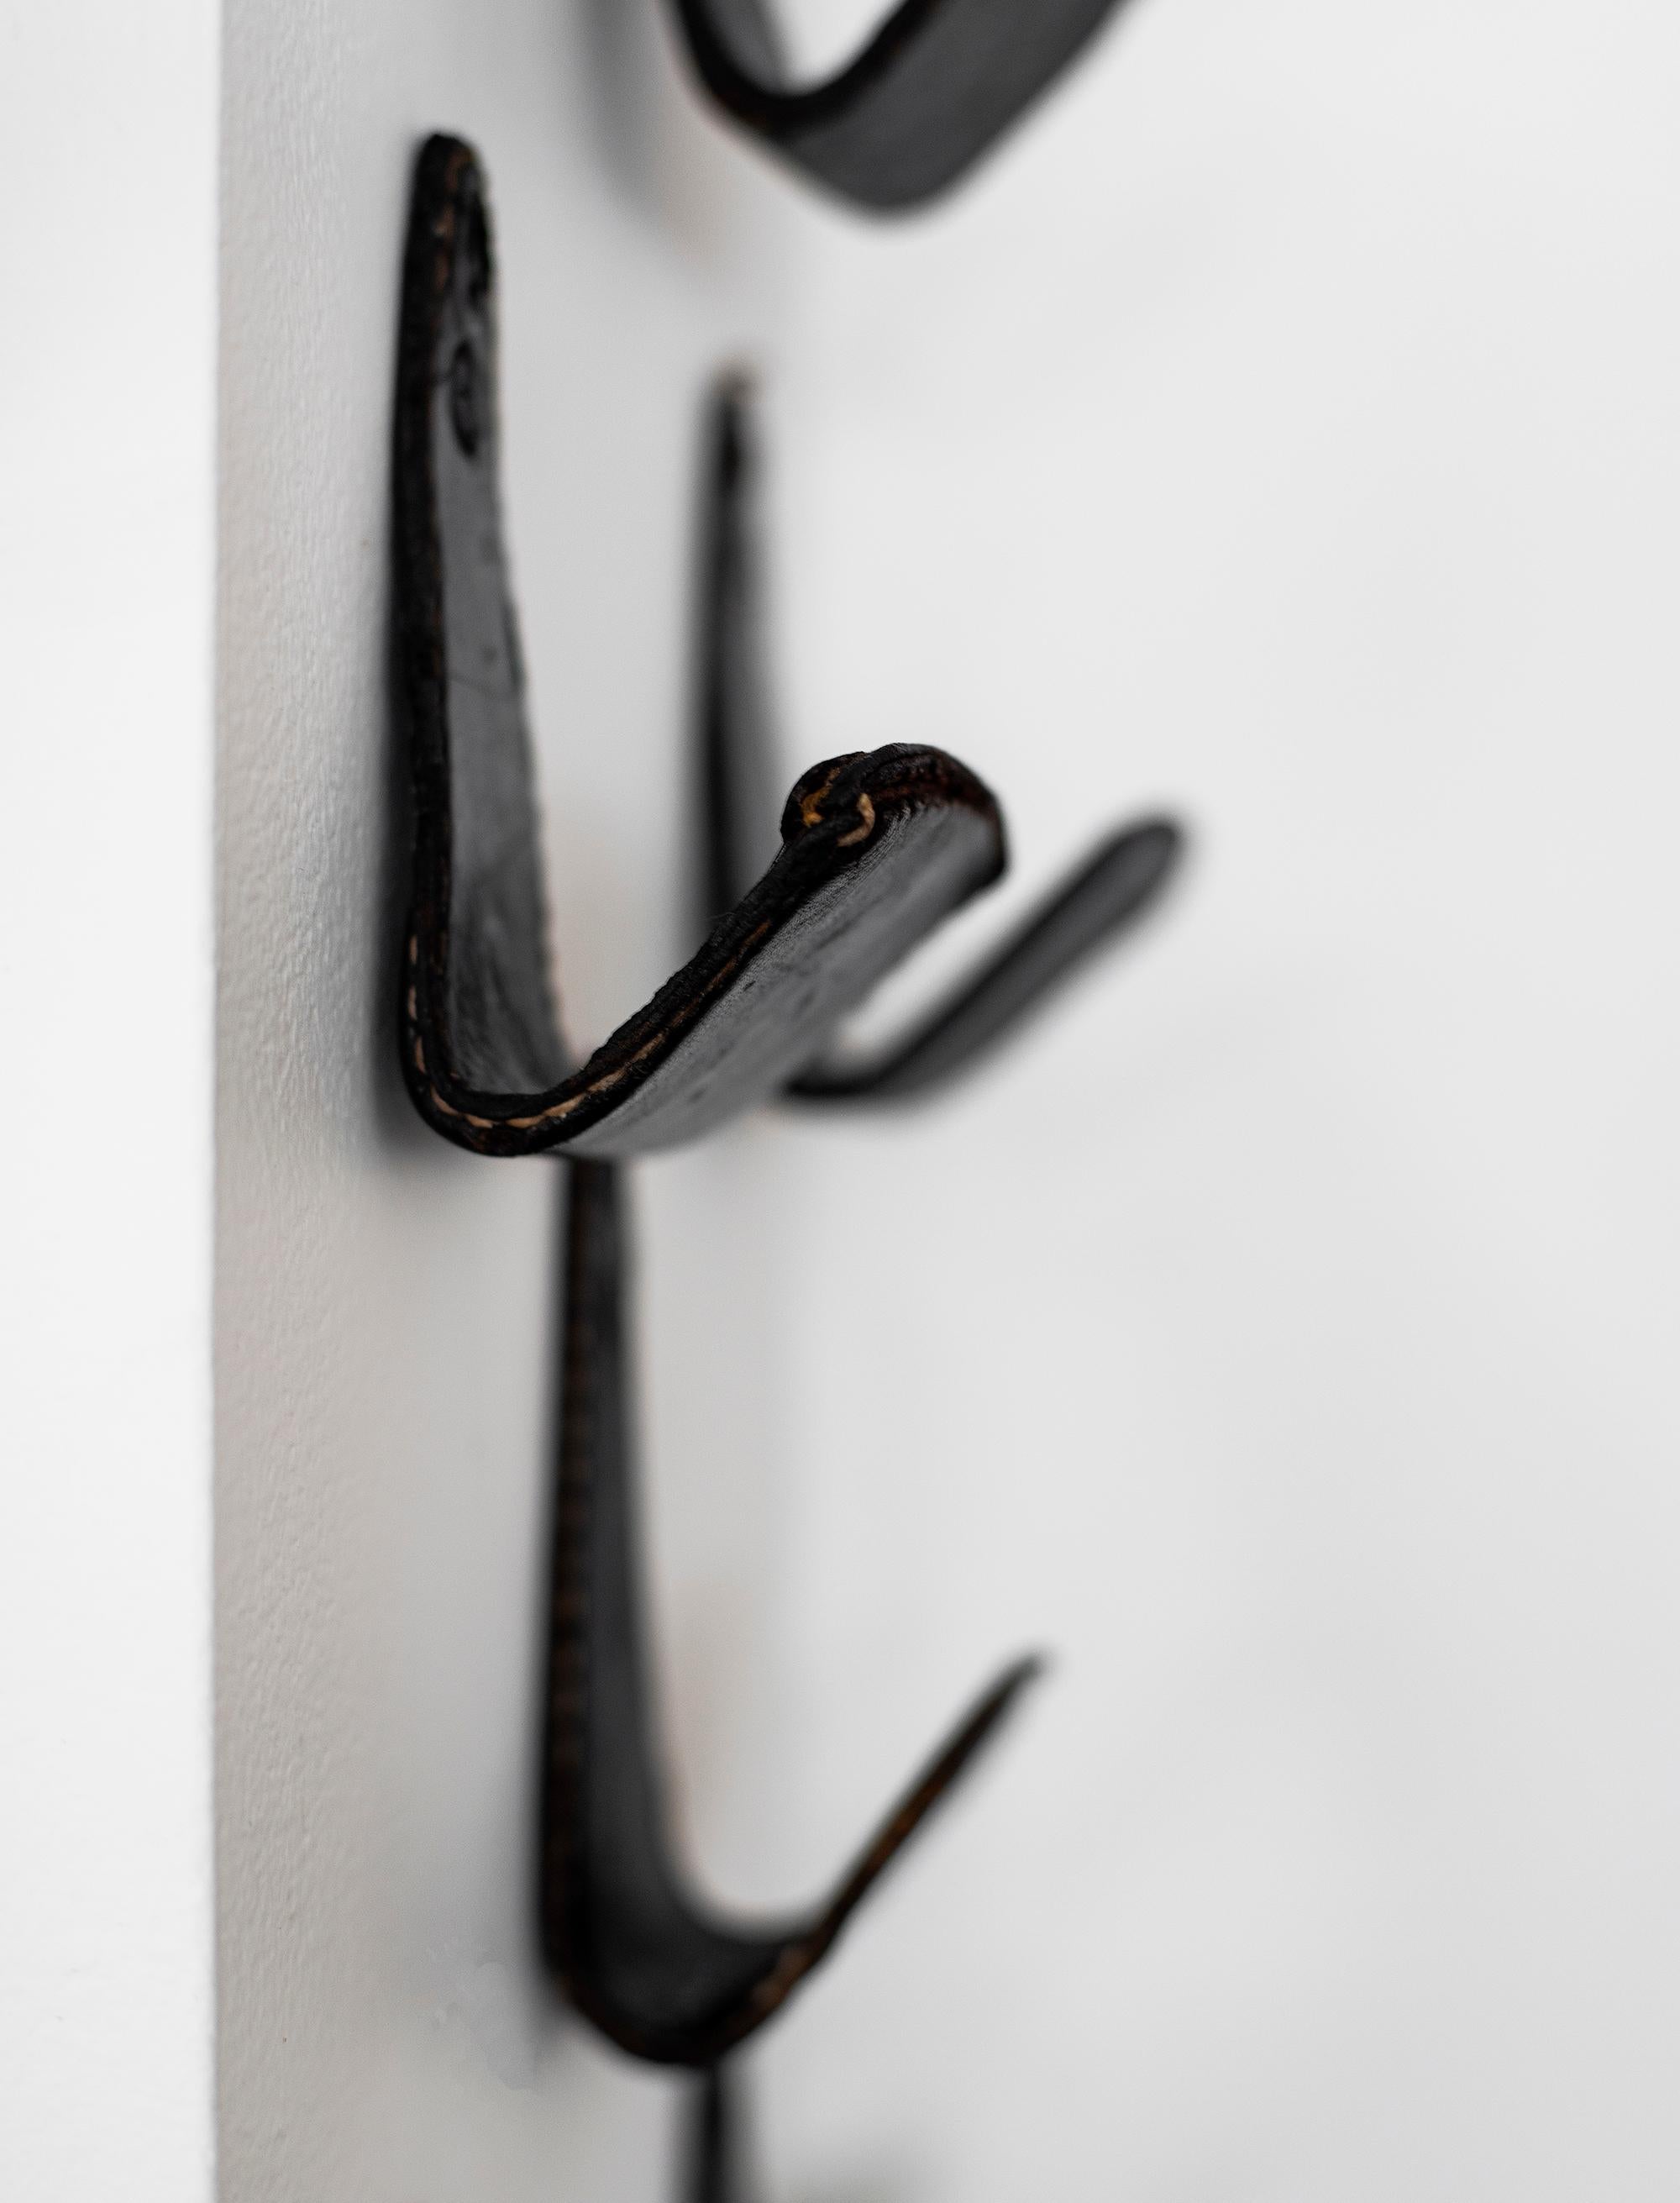 Stunning Jacques Adnet attributed coat hook. Original black leather with white contrast stitching. 1 available. 